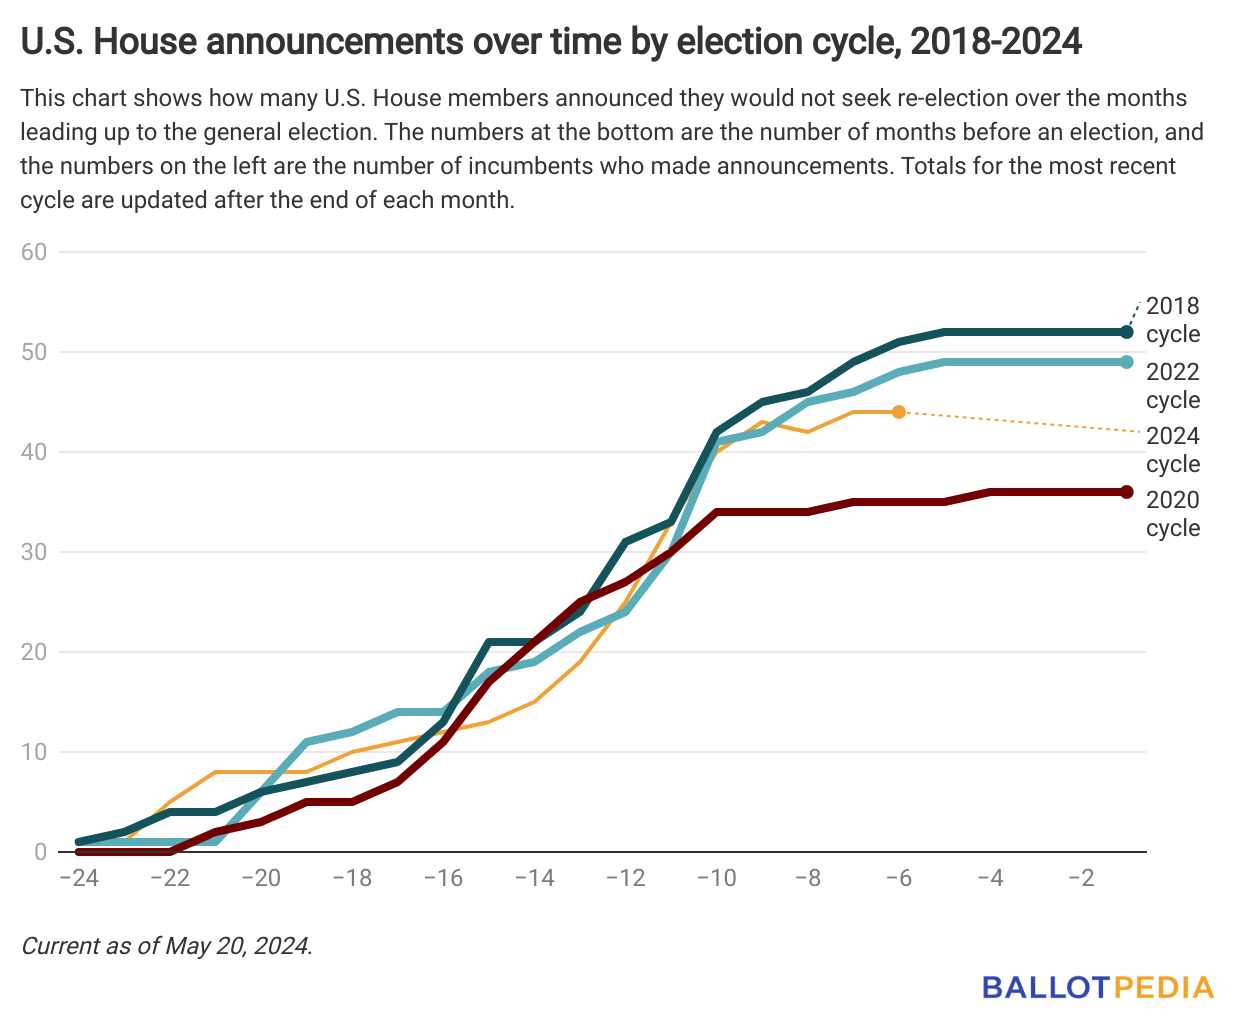 Graph showing U.S. House announcements over time by election cycle 2018-2024.